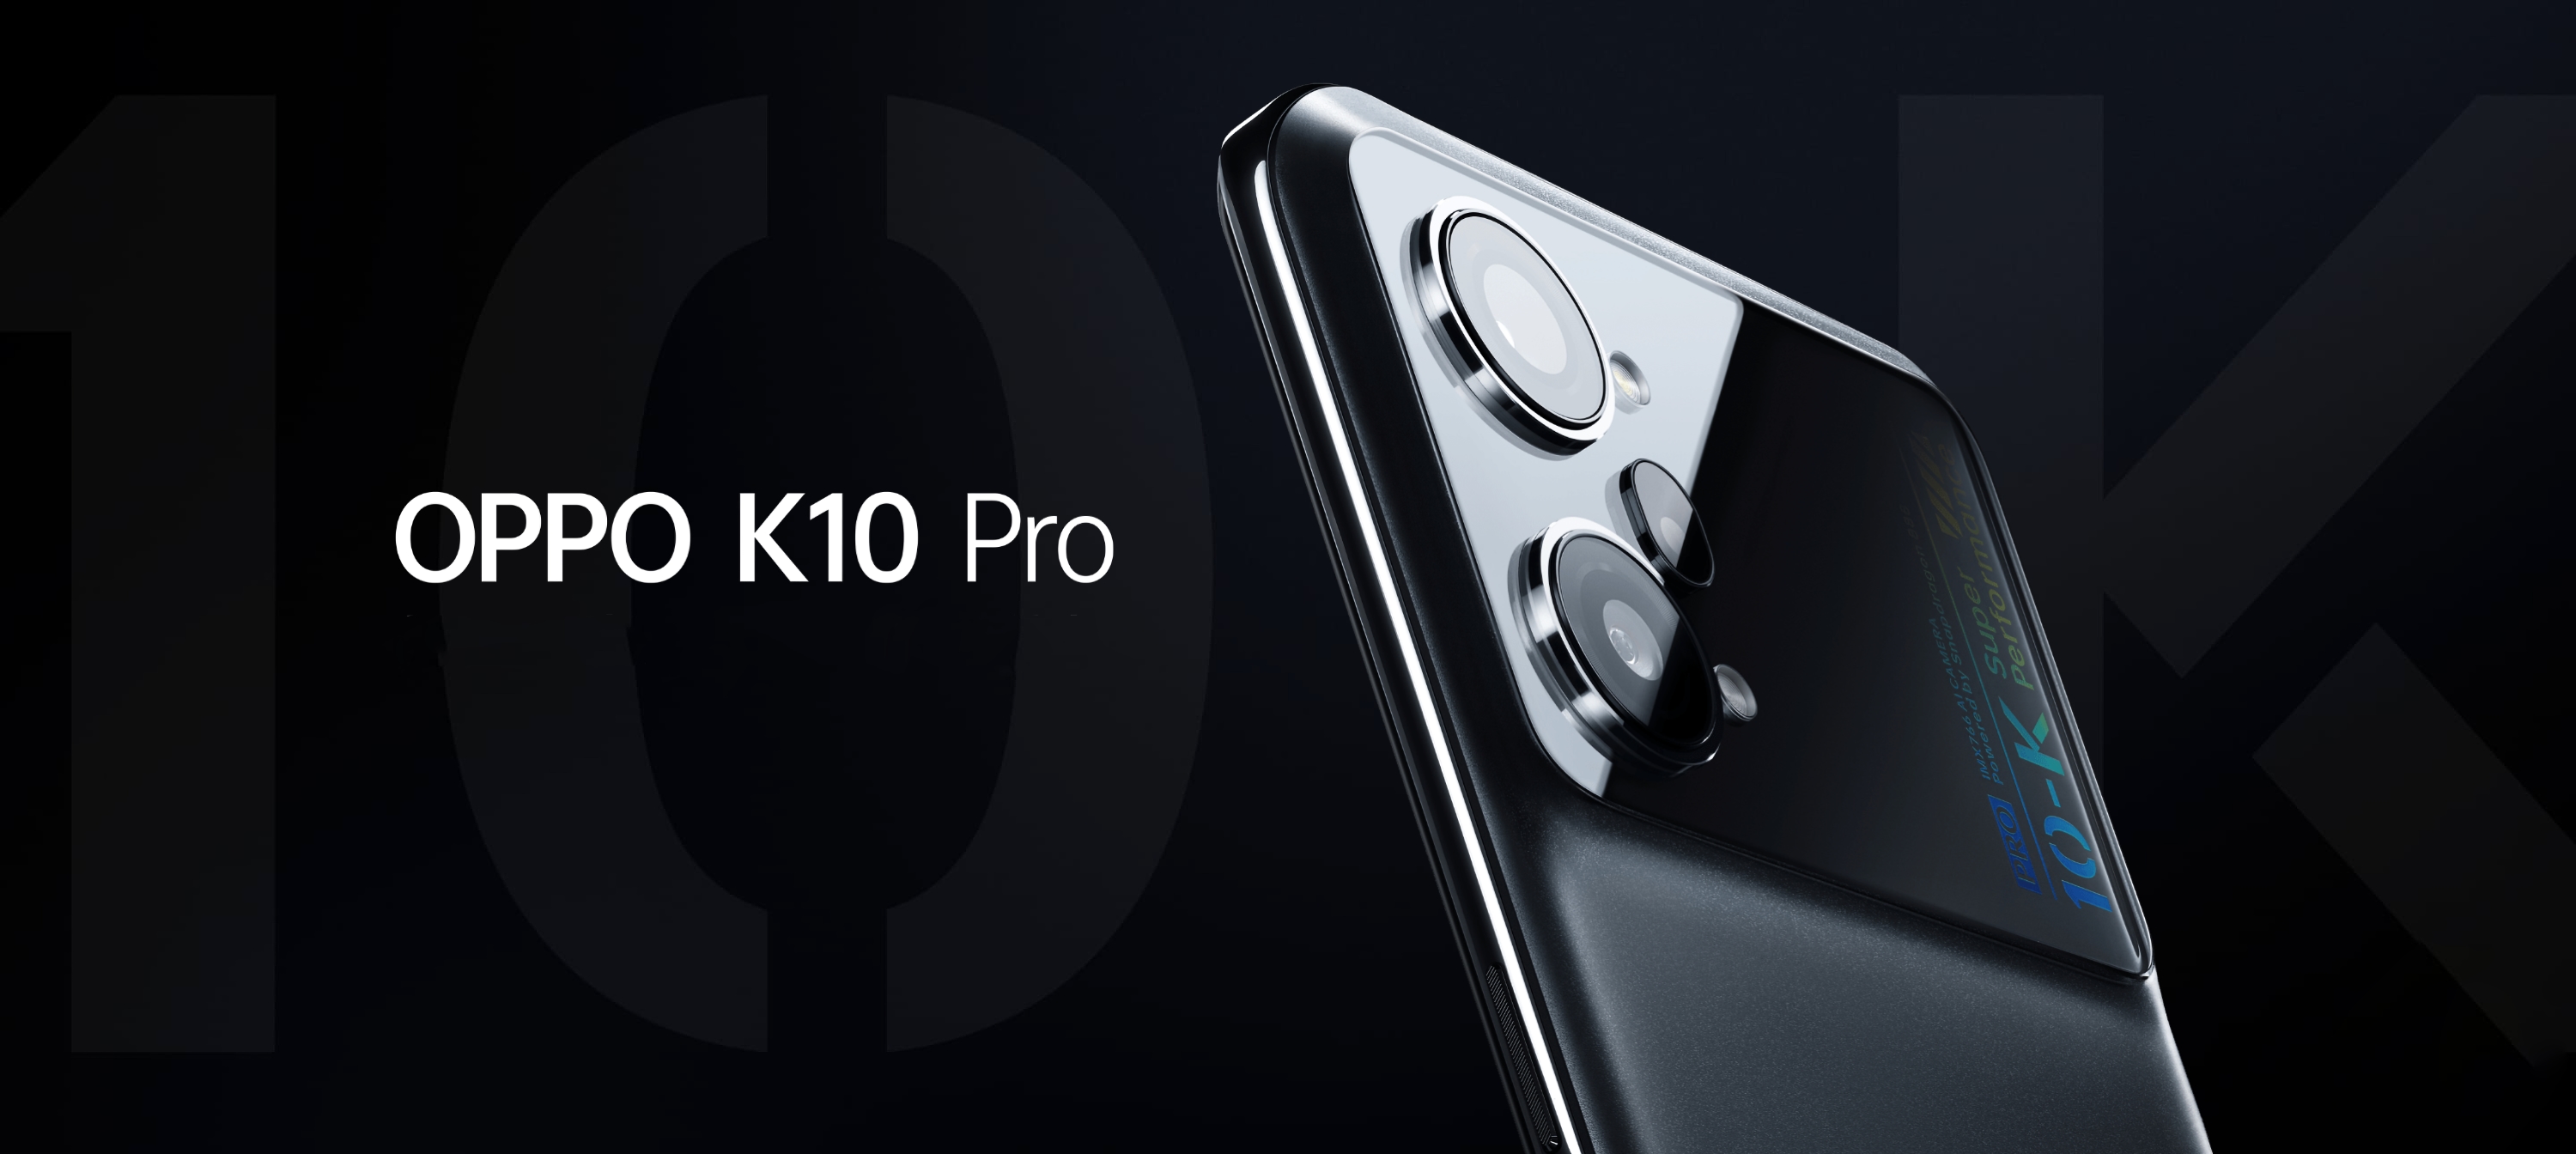 OPPO K10 Pro: 120Hz AMOLED screen, Snapdragon 888 chip, 50MP triple camera and 80W fast charging for $385